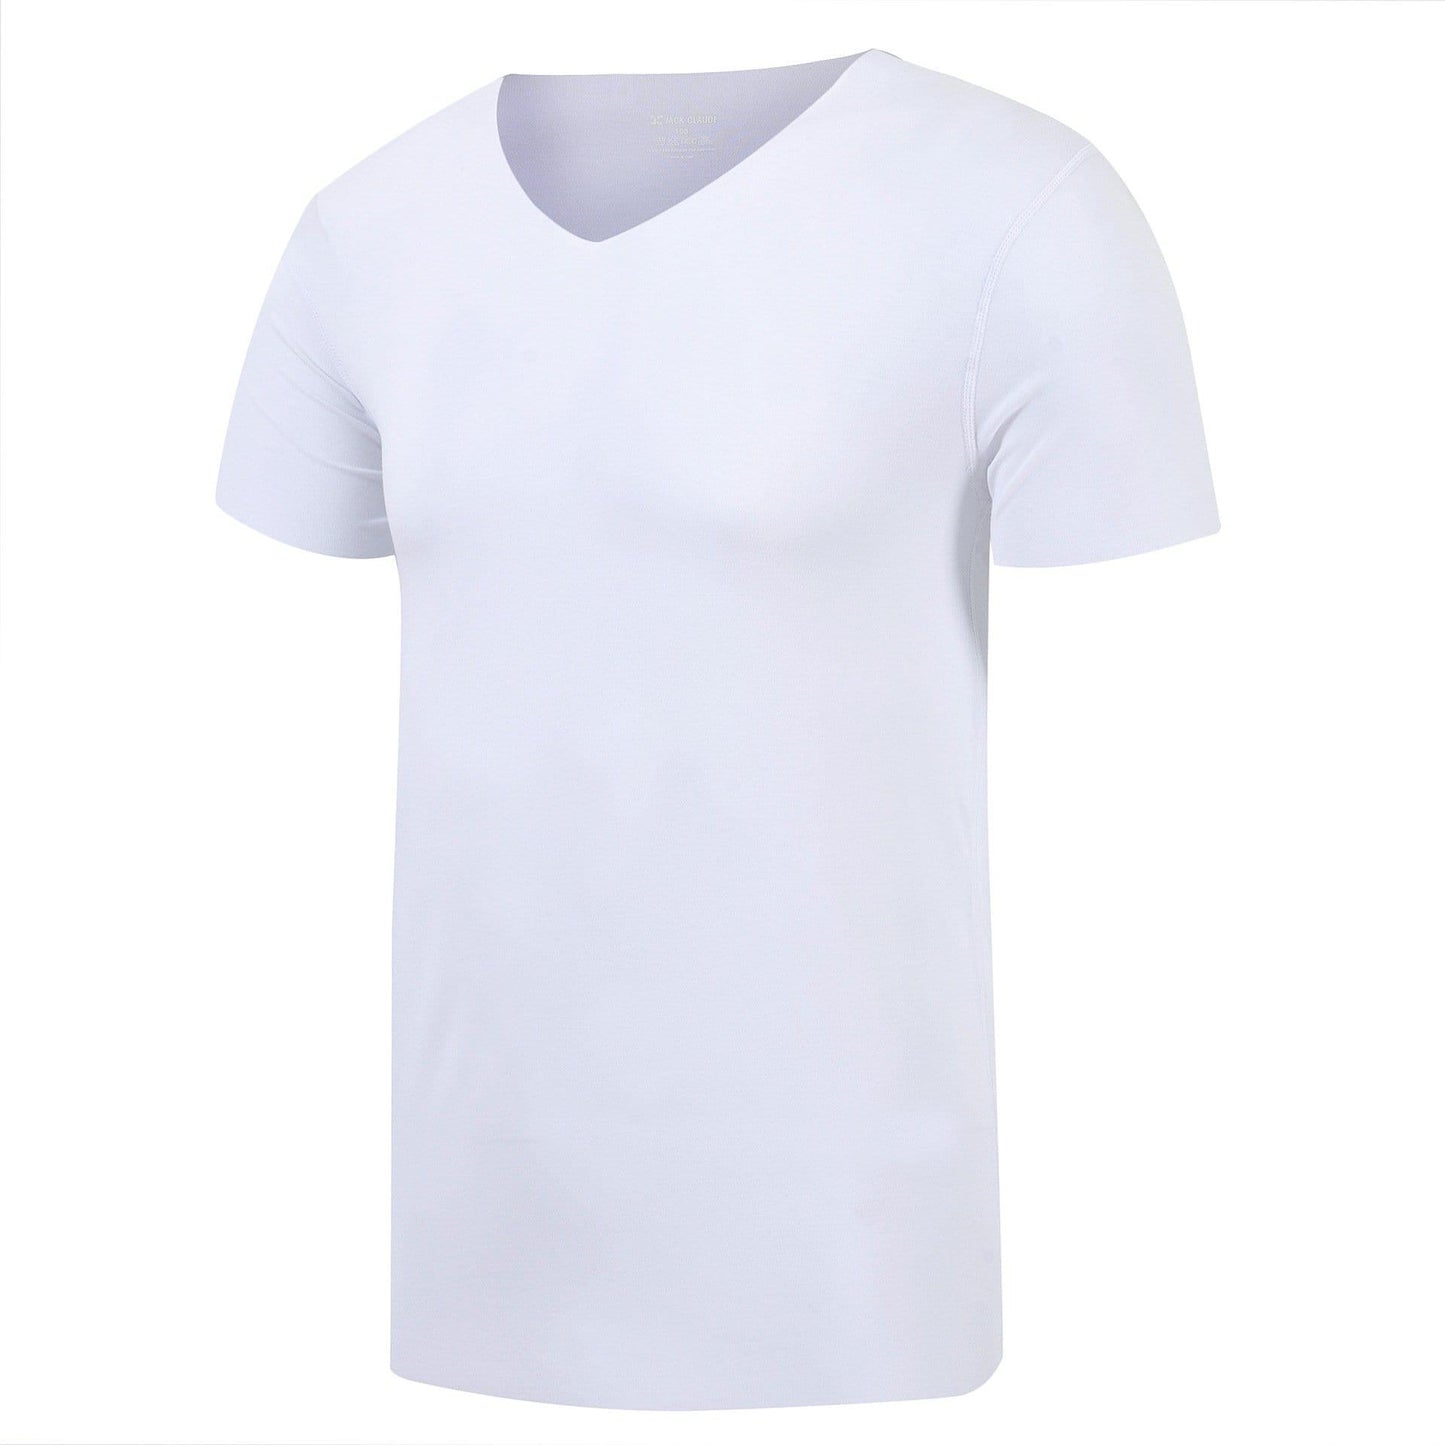 ezy2find Men's Shirts White / XXL Cut half-sleeved solid color bottoming shirtr bottoming shirt